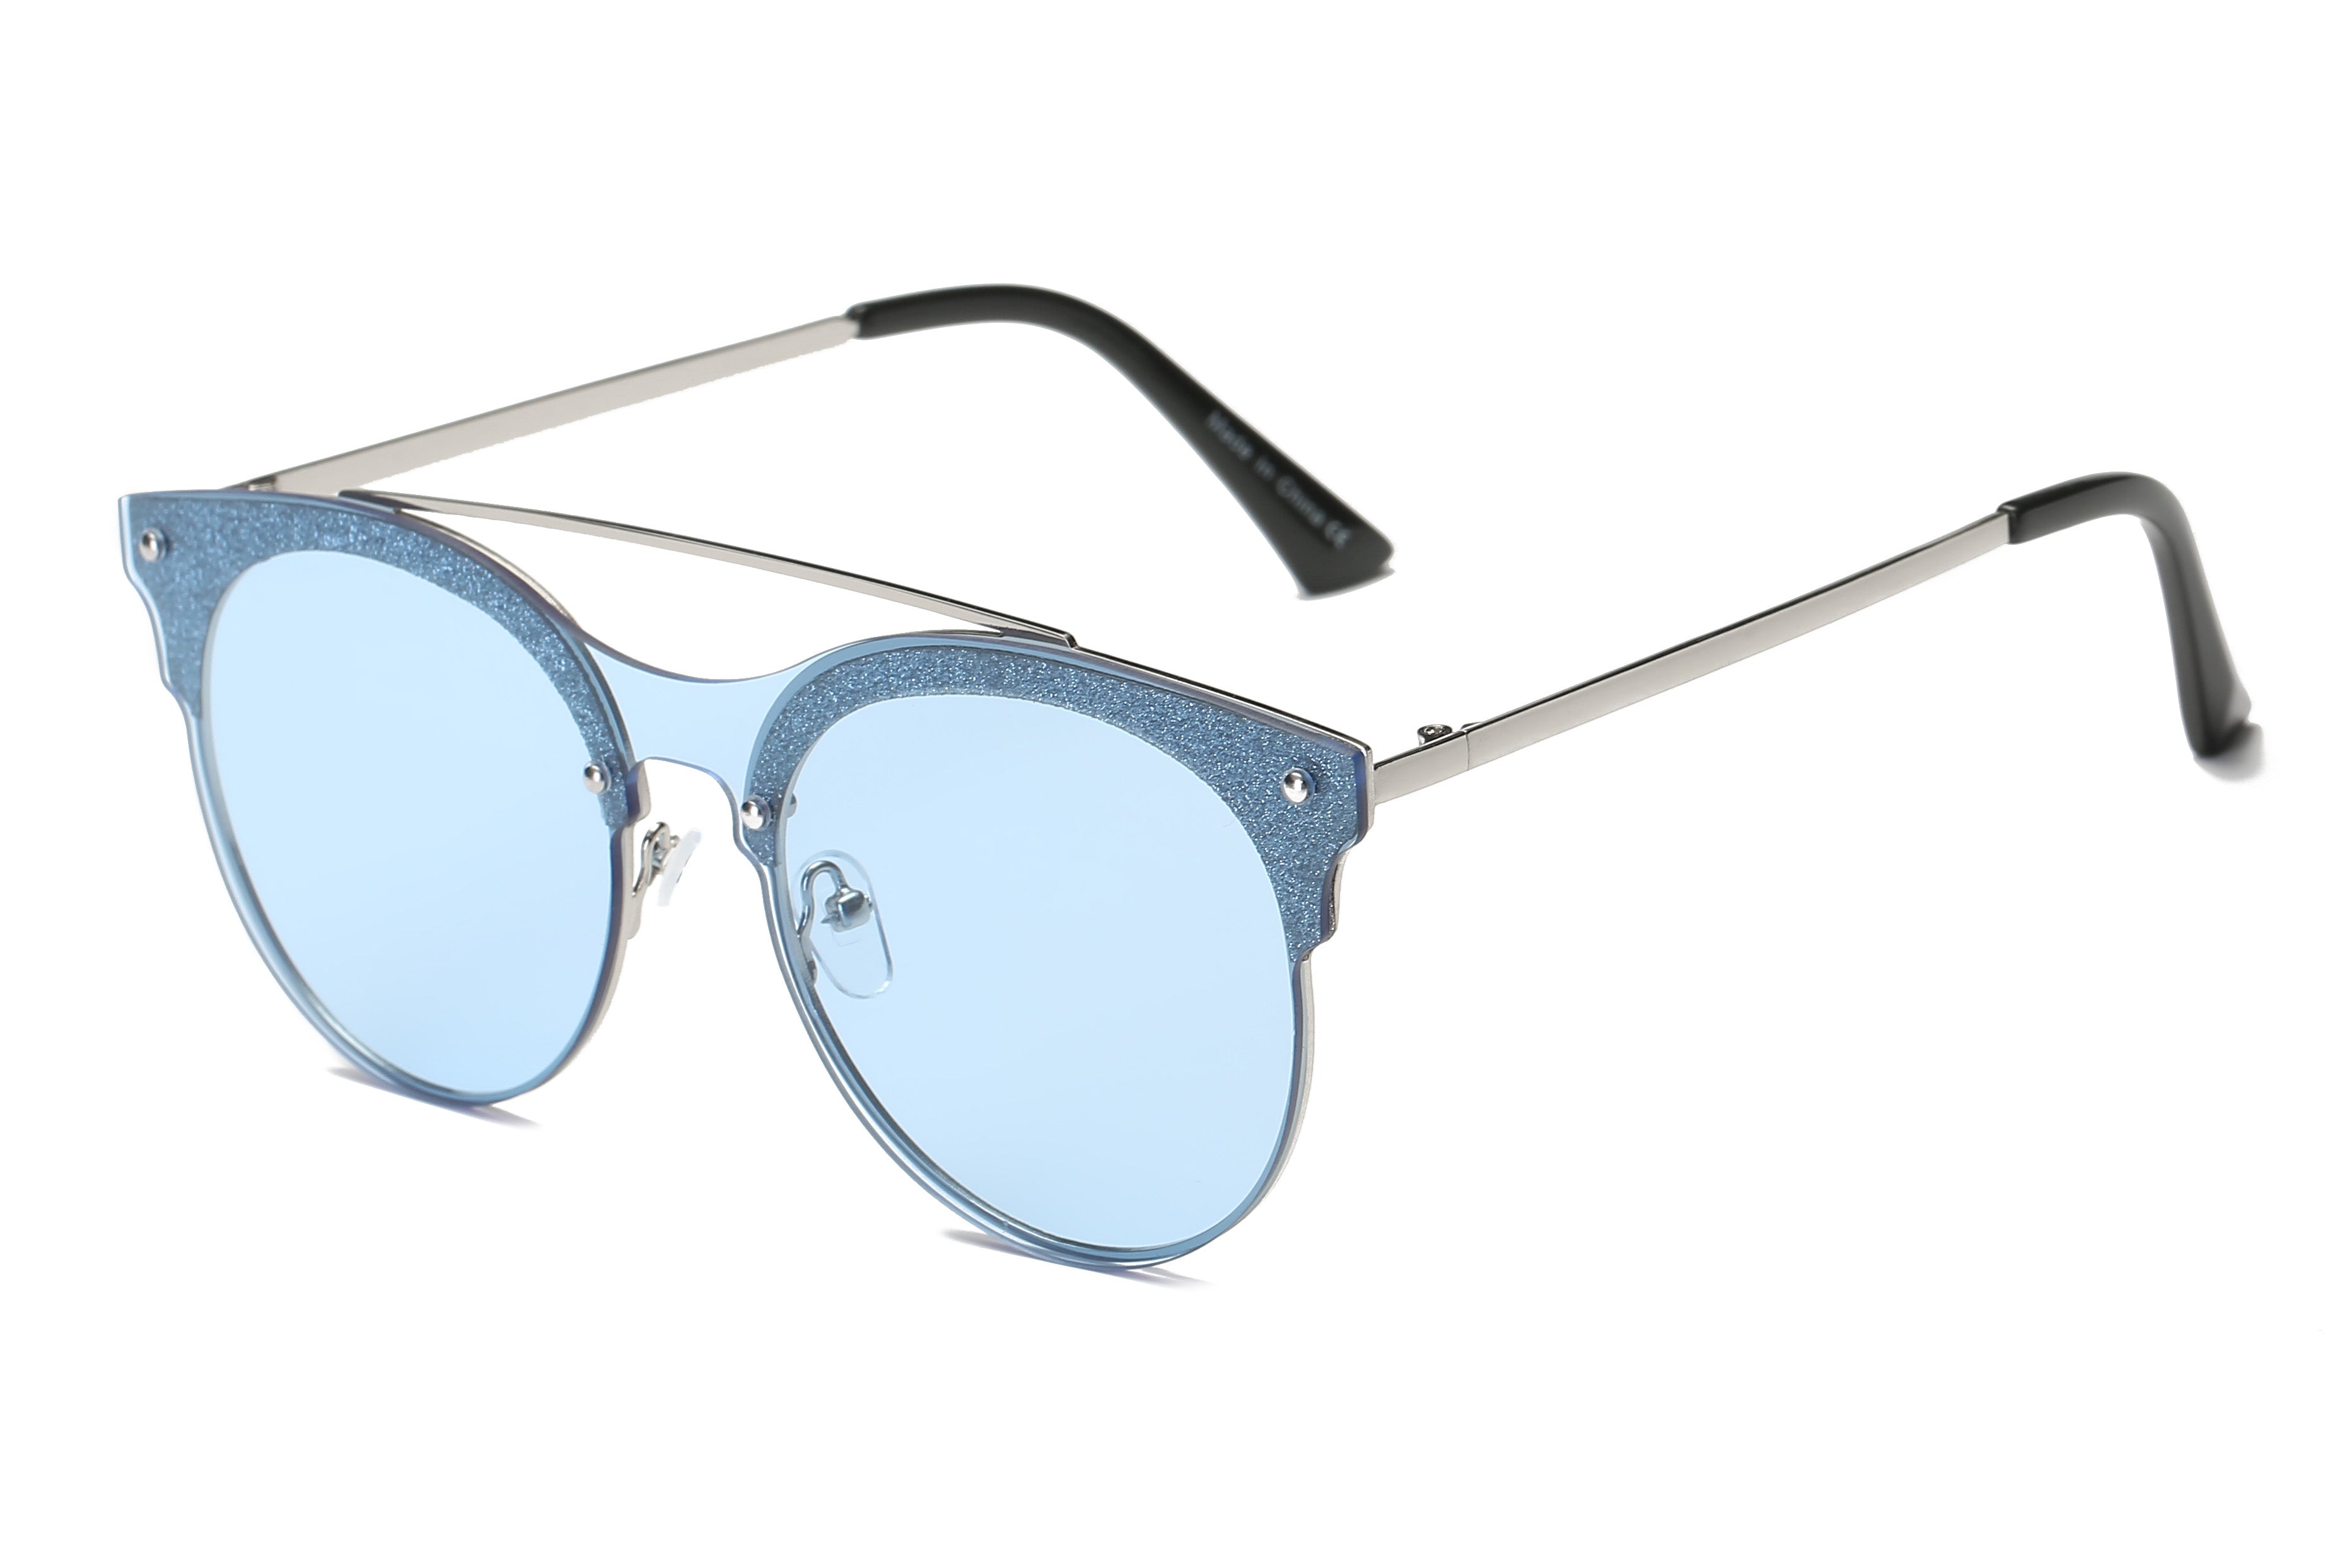 S3011 - Round Circle Double Bar Tinted Fashion SUNGLASSES Silver/Blue